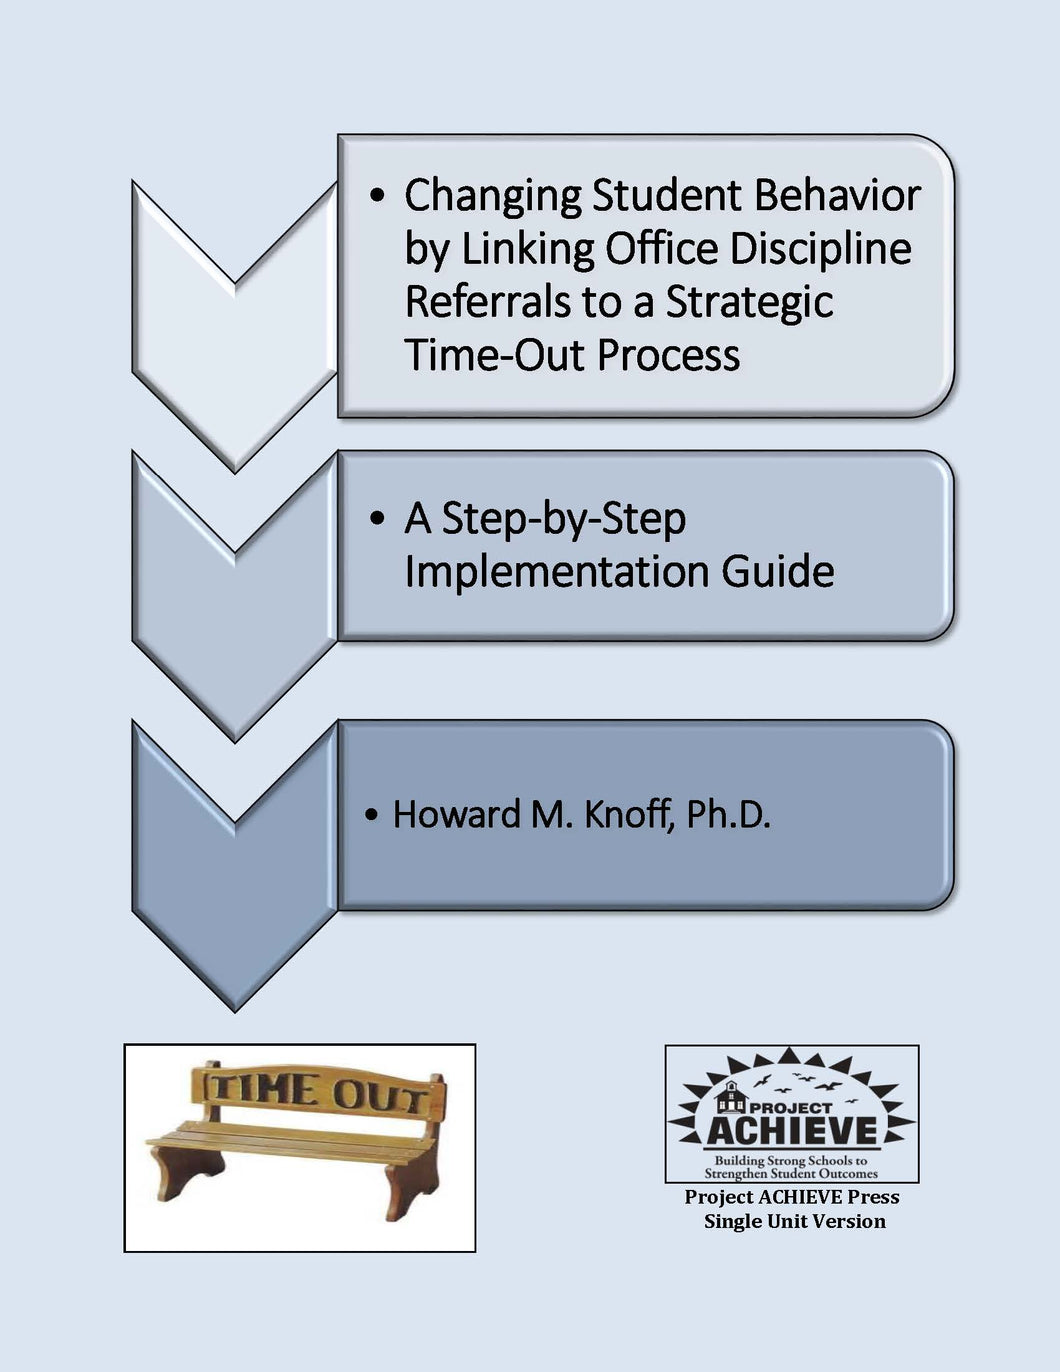 Changing Student Behavior by Linking Office Discipline Referrals to a Strategic Time-Out Process:  A Step-by-Step Implementation Guide